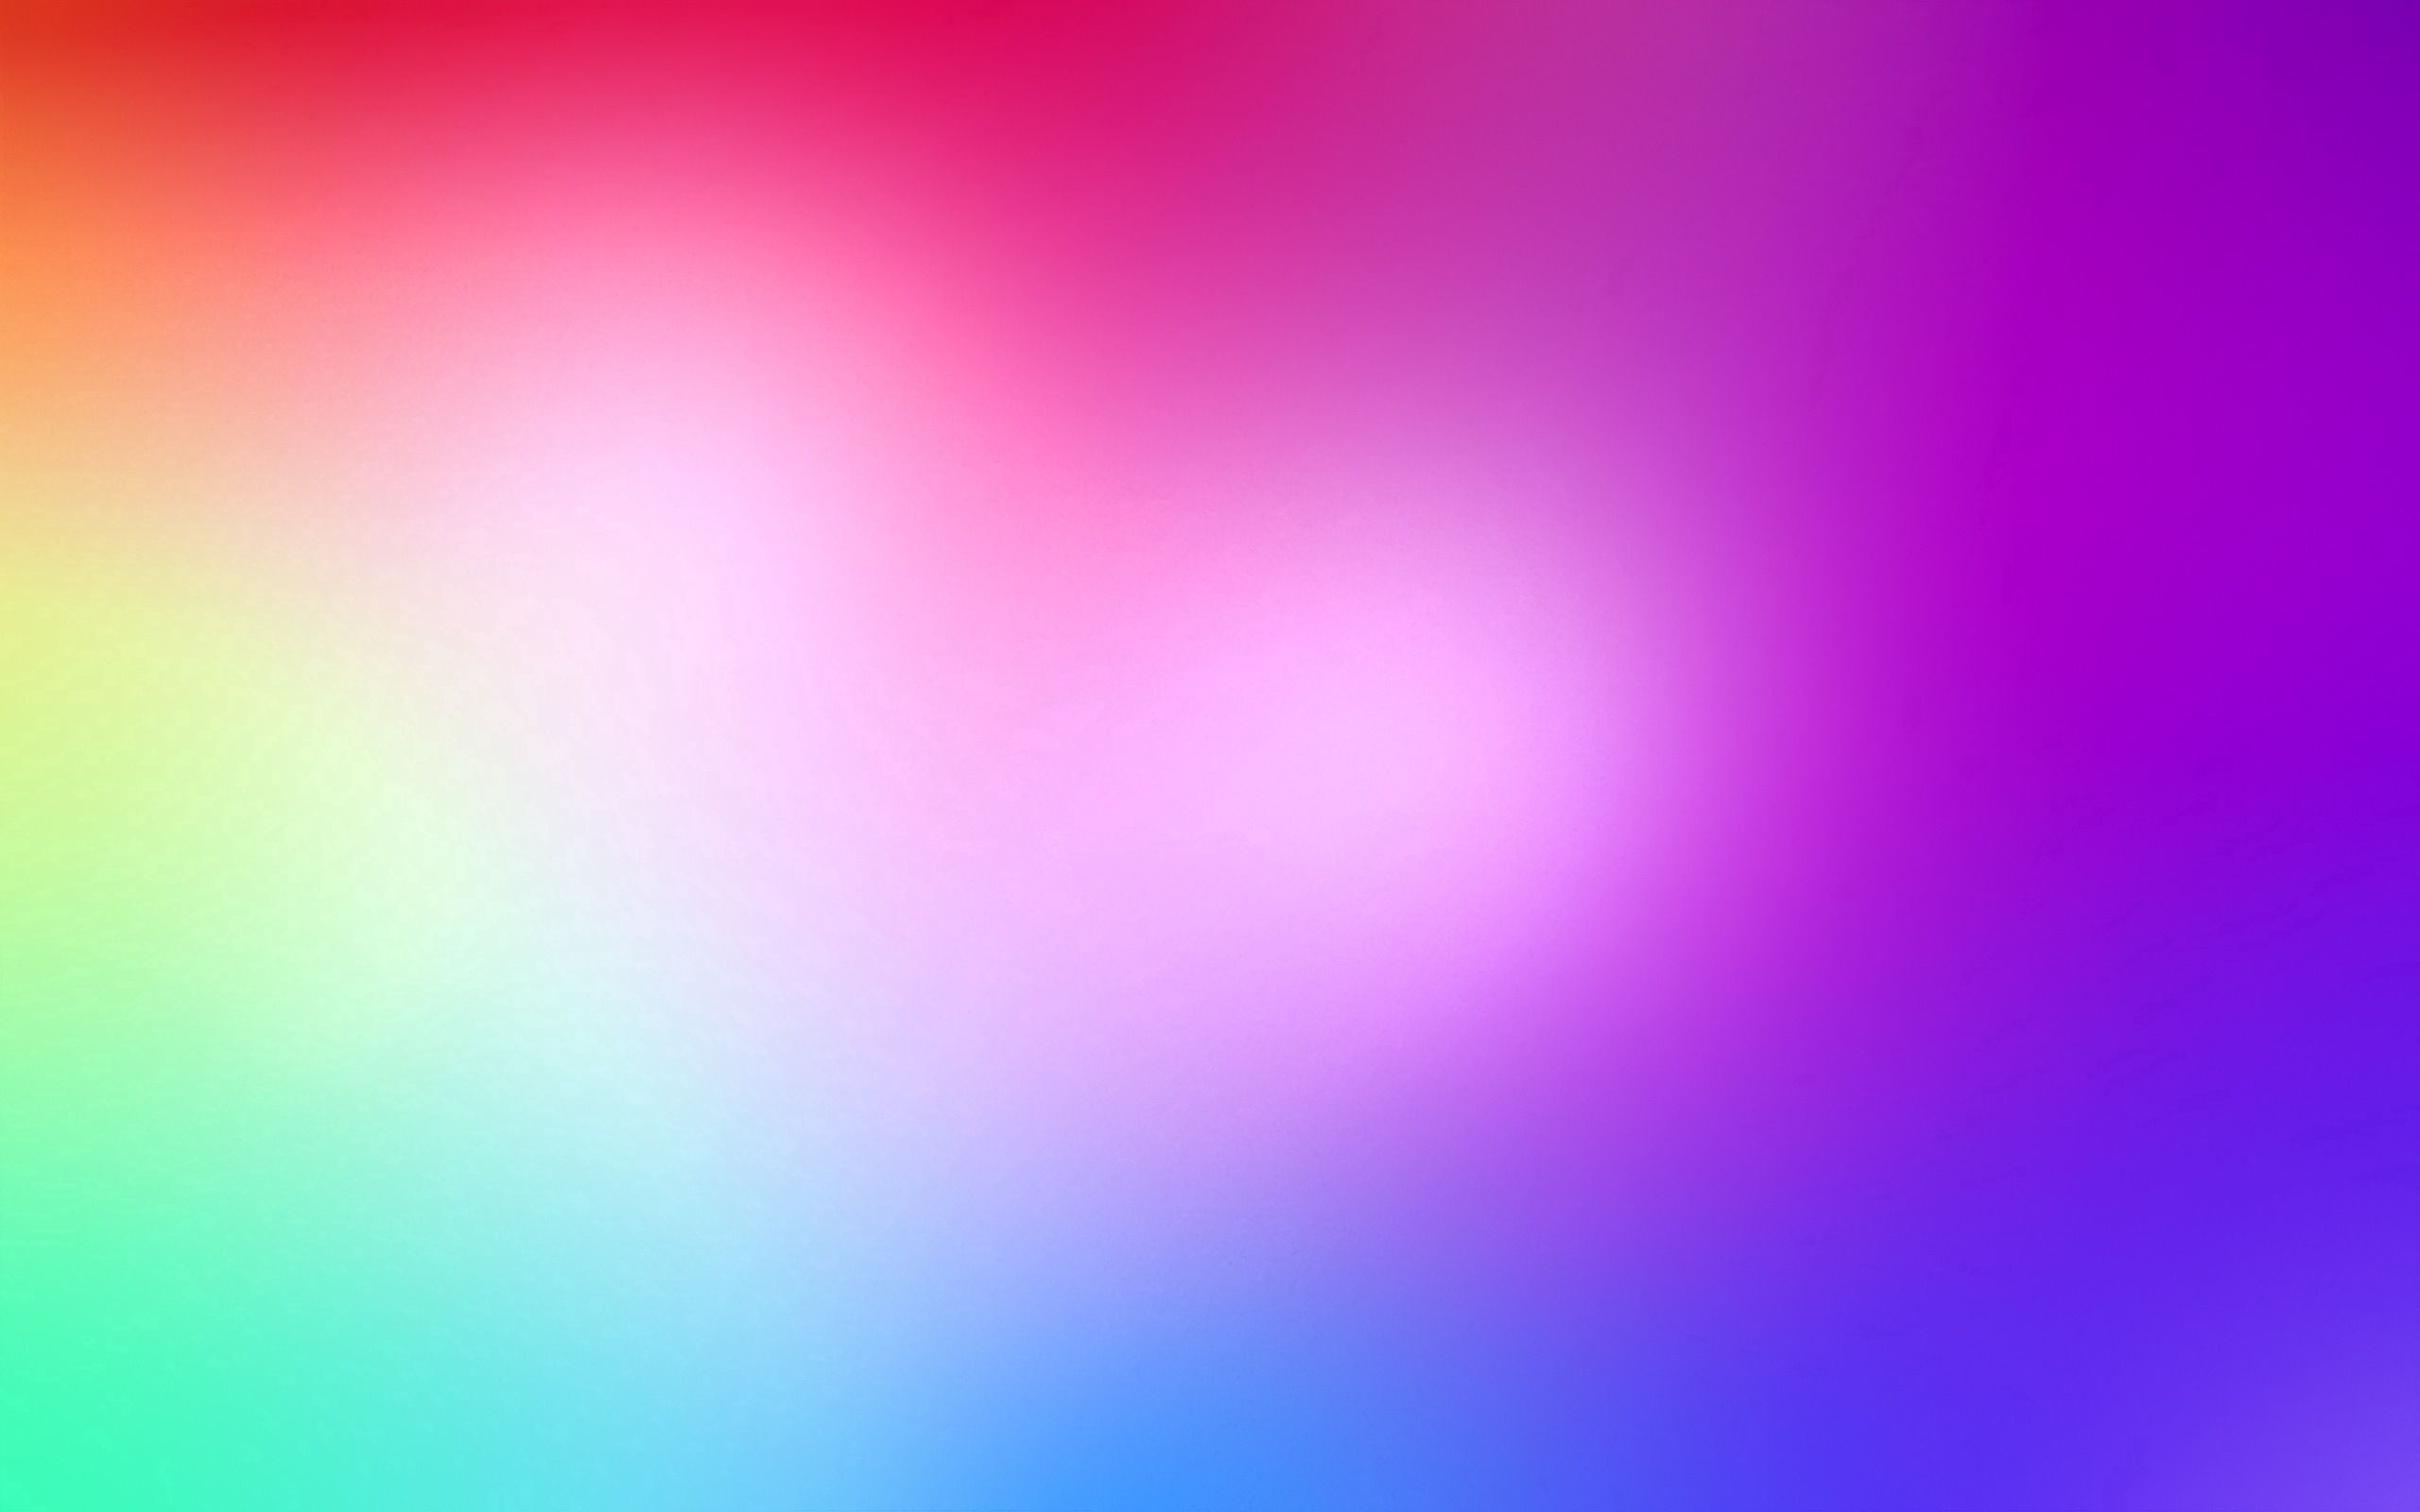 105263 download wallpaper background, abstract, rainbow, light, light coloured, stains, spots, iridescent screensavers and pictures for free